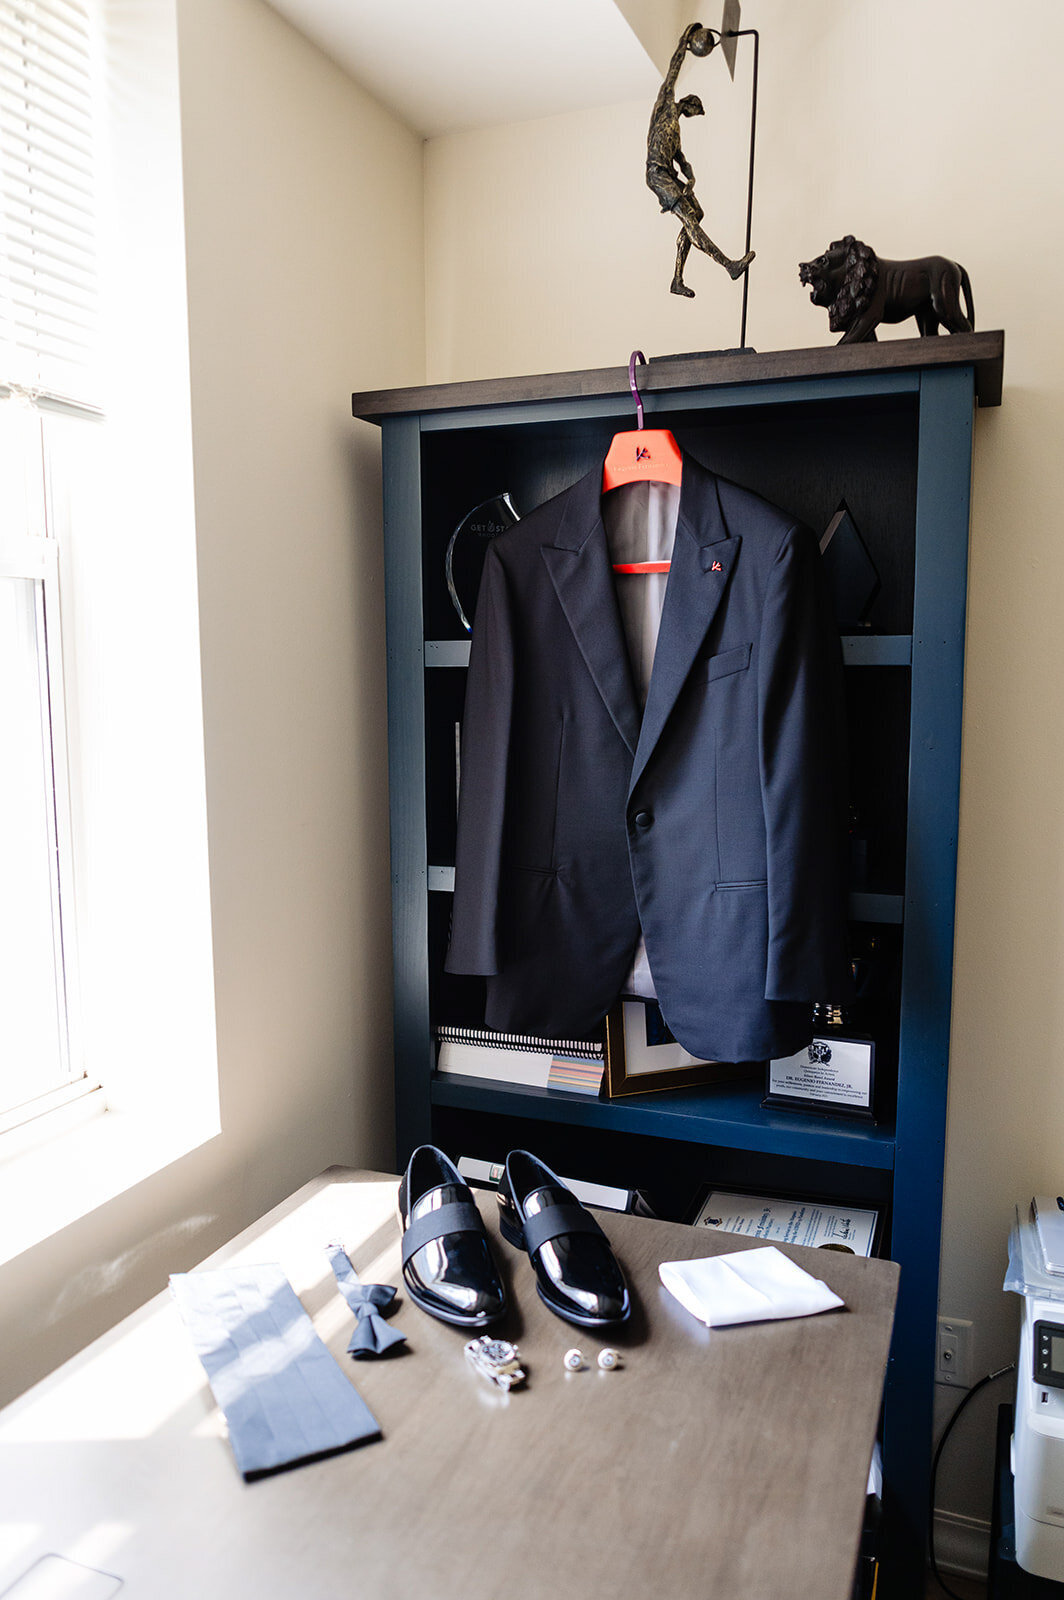 A groom's wedding attire displayed in a room with natural light; a navy blue suit hanging on a shelf with a white dress shirt, shiny black dress shoes, a tie, cufflinks, and a pocket square neatly arranged on a desk